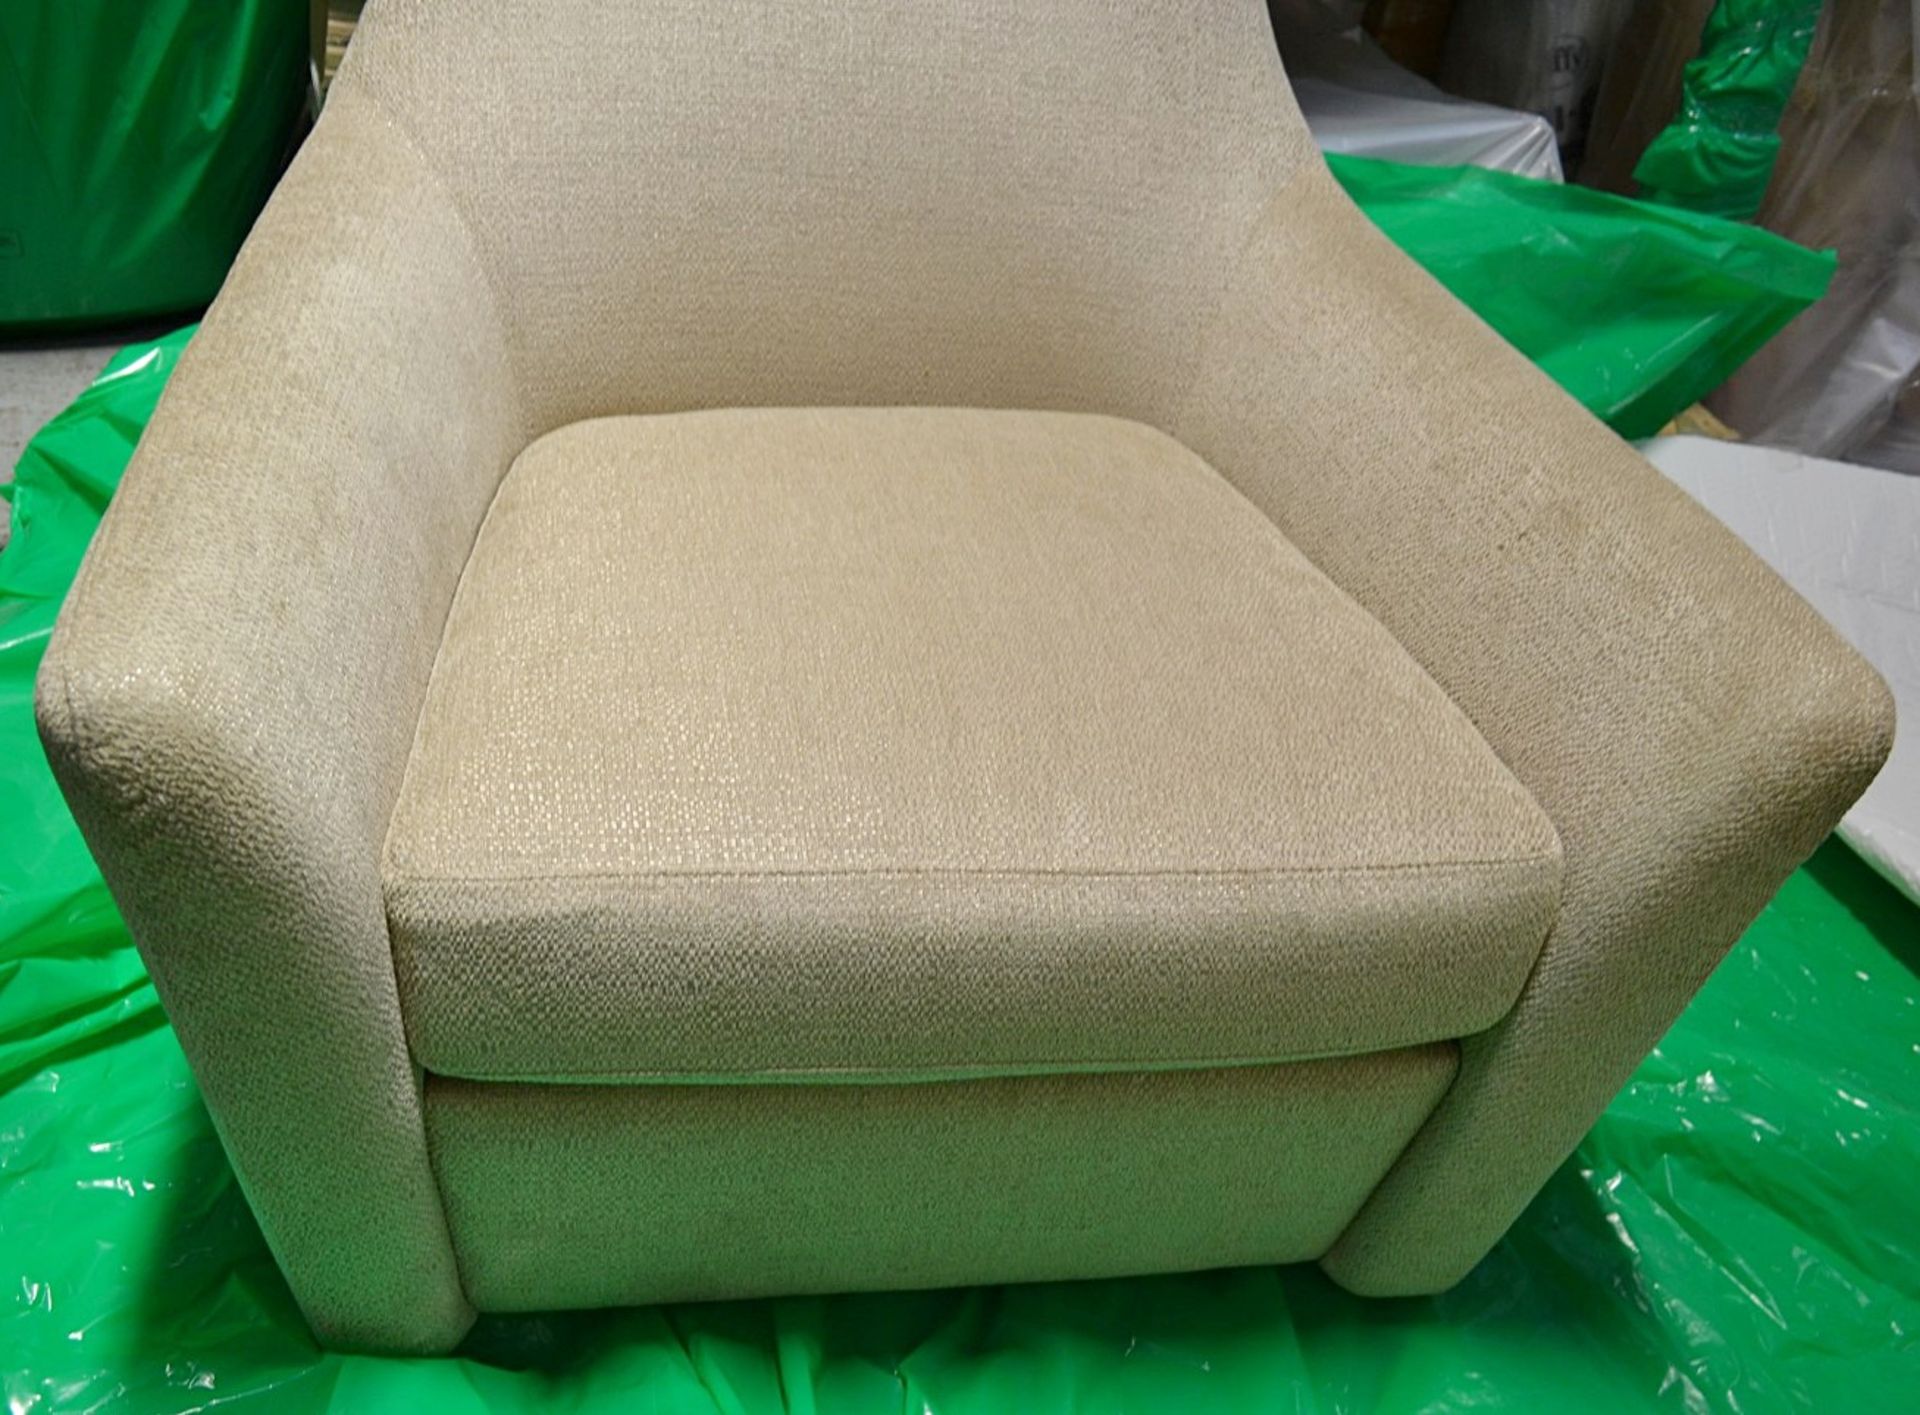 1 x KESTERPORT "Bergere" Swivel Armchair - Dimensions: W89 x D84 x H98cm, Seat Height 43cm - Ritchly - Image 2 of 12